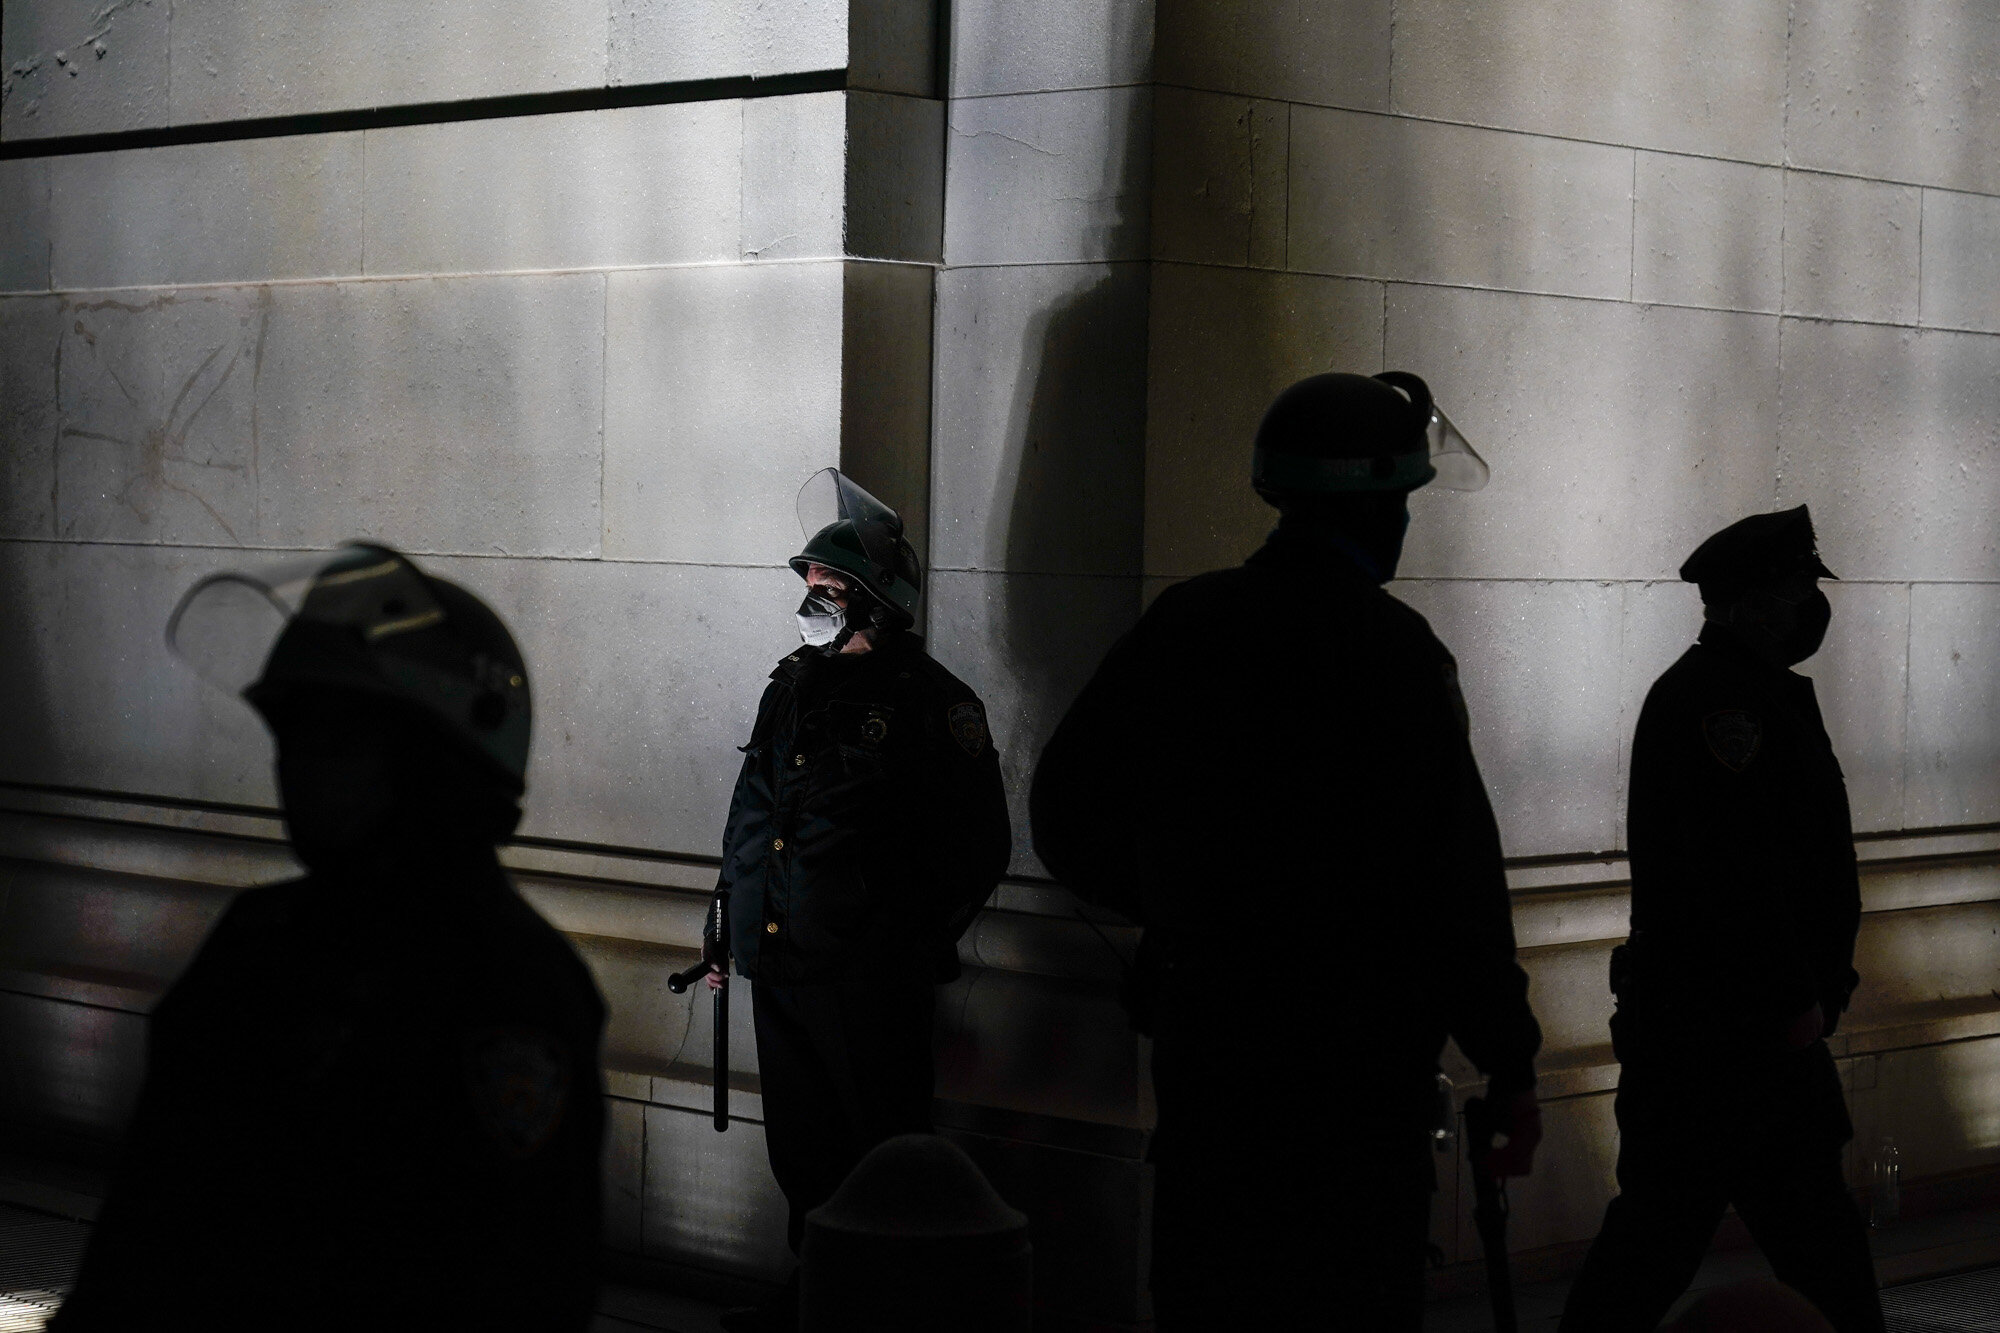  New York Police officers block off the north entrance to Washington Square Park after facing off with protestors, on Nov. 4, 2020, in New York, the day after the U.S. general election.  (AP Photo/Seth Wenig) 